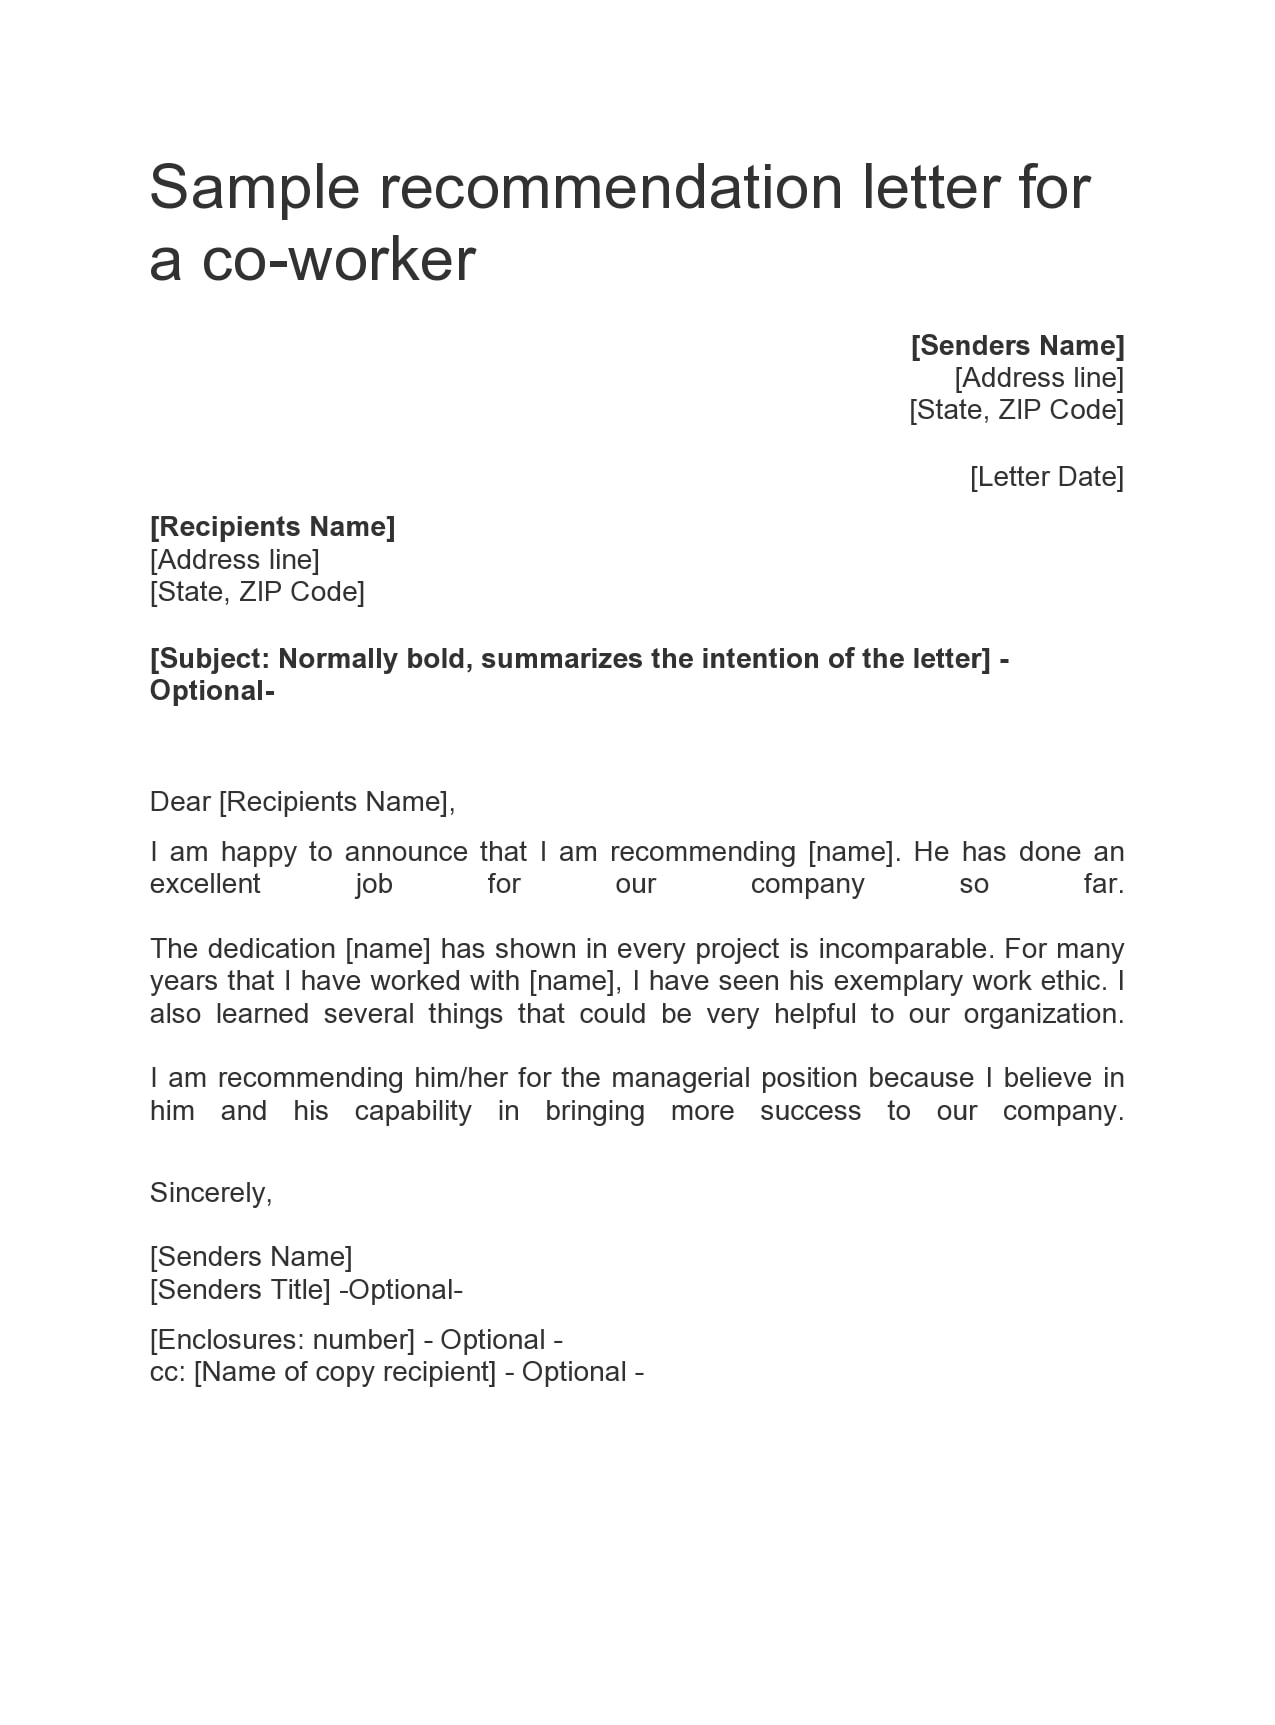 Employee Letter Of Recommendation Template from templatearchive.com